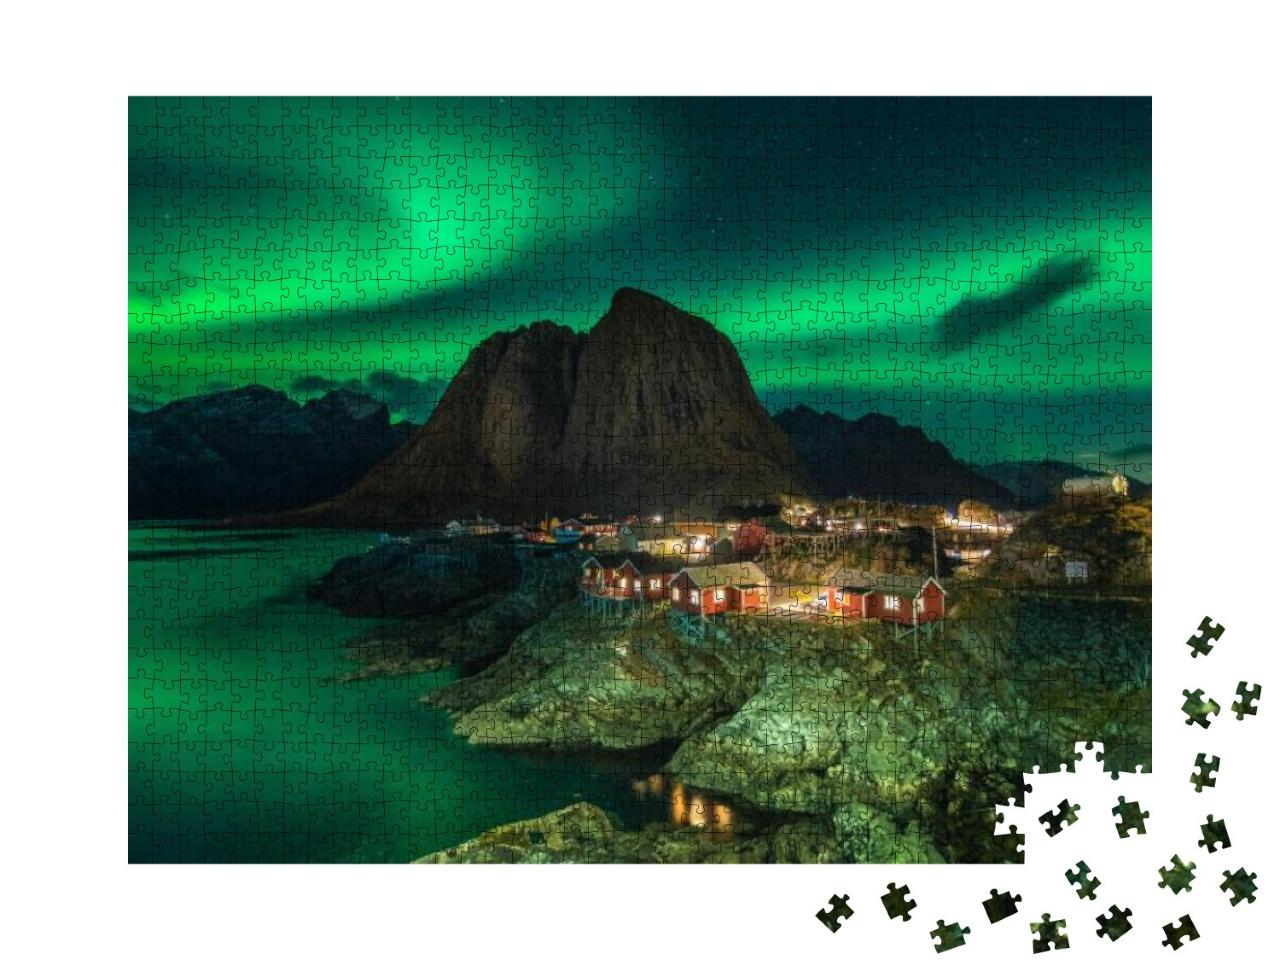 Amazing Northern Light Scene At Reine Town, Norway... Jigsaw Puzzle with 1000 pieces